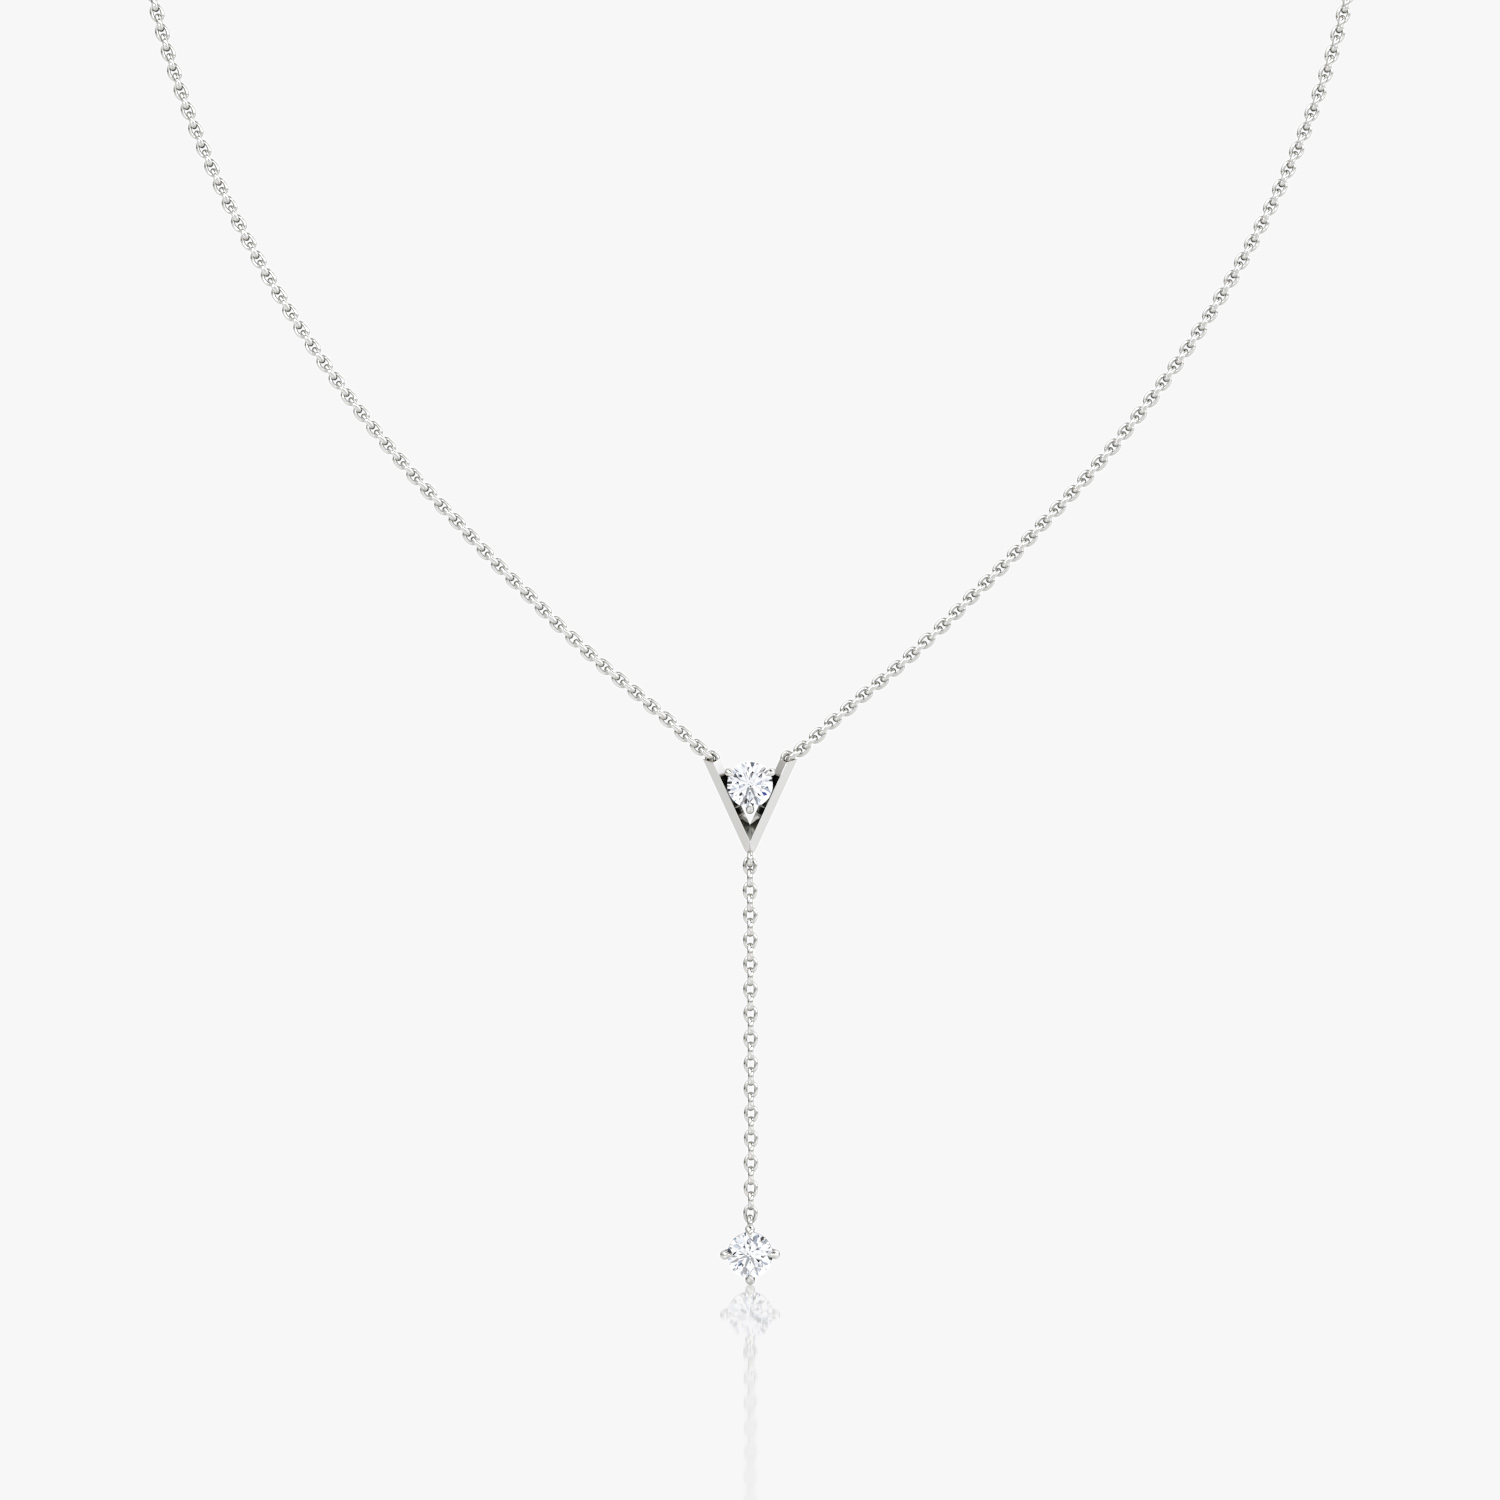 Teardrop Necklace with Lariat